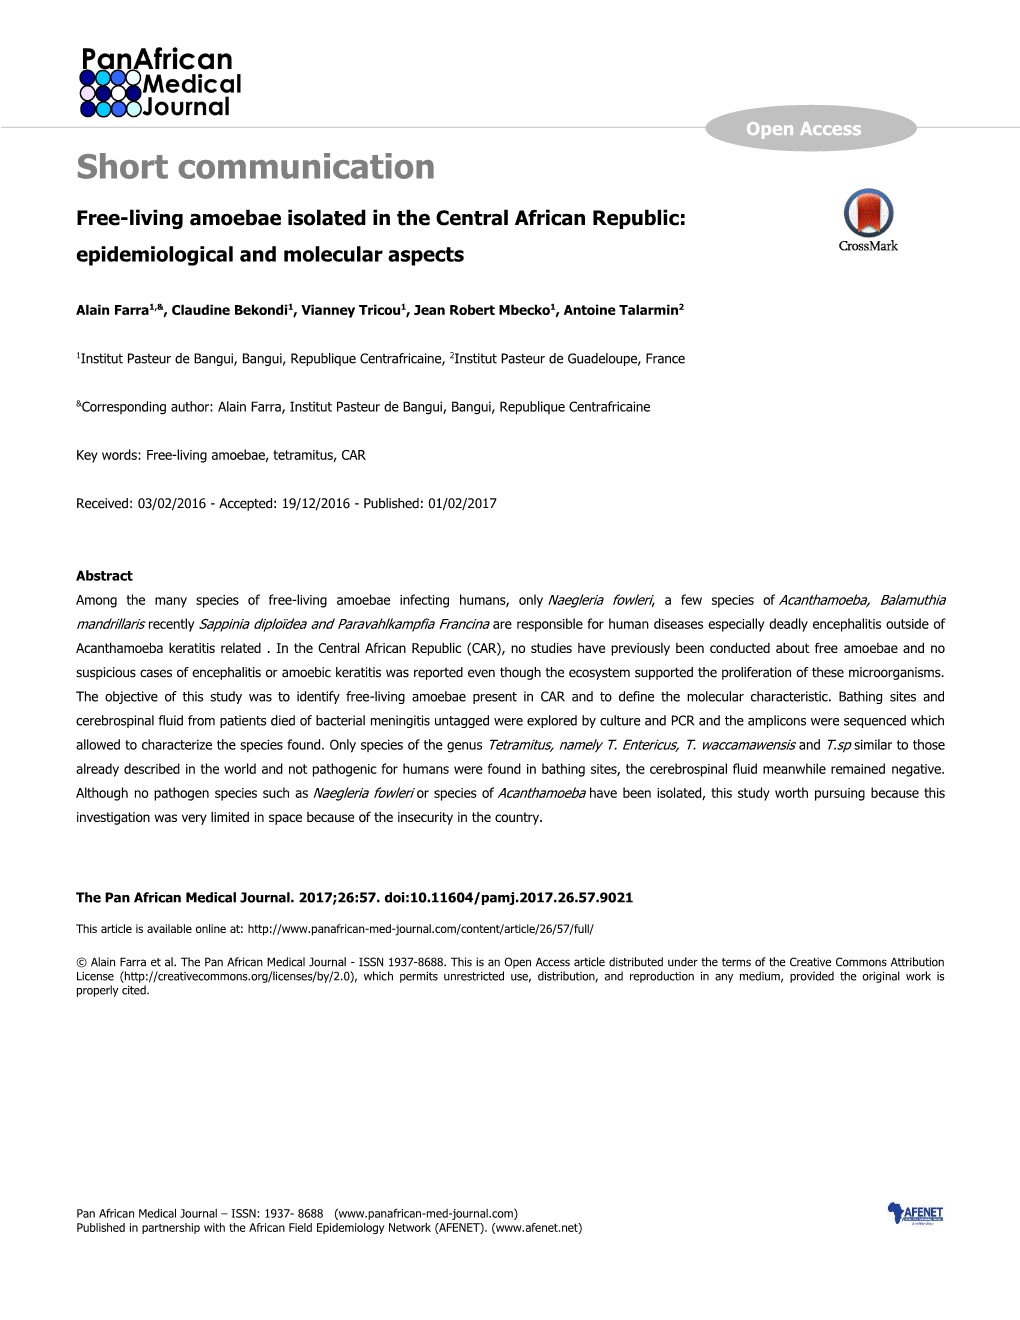 Short Communication Free -Living Amoebae Isolated in the Central African Republic: Epidemiological and Molecular Aspects